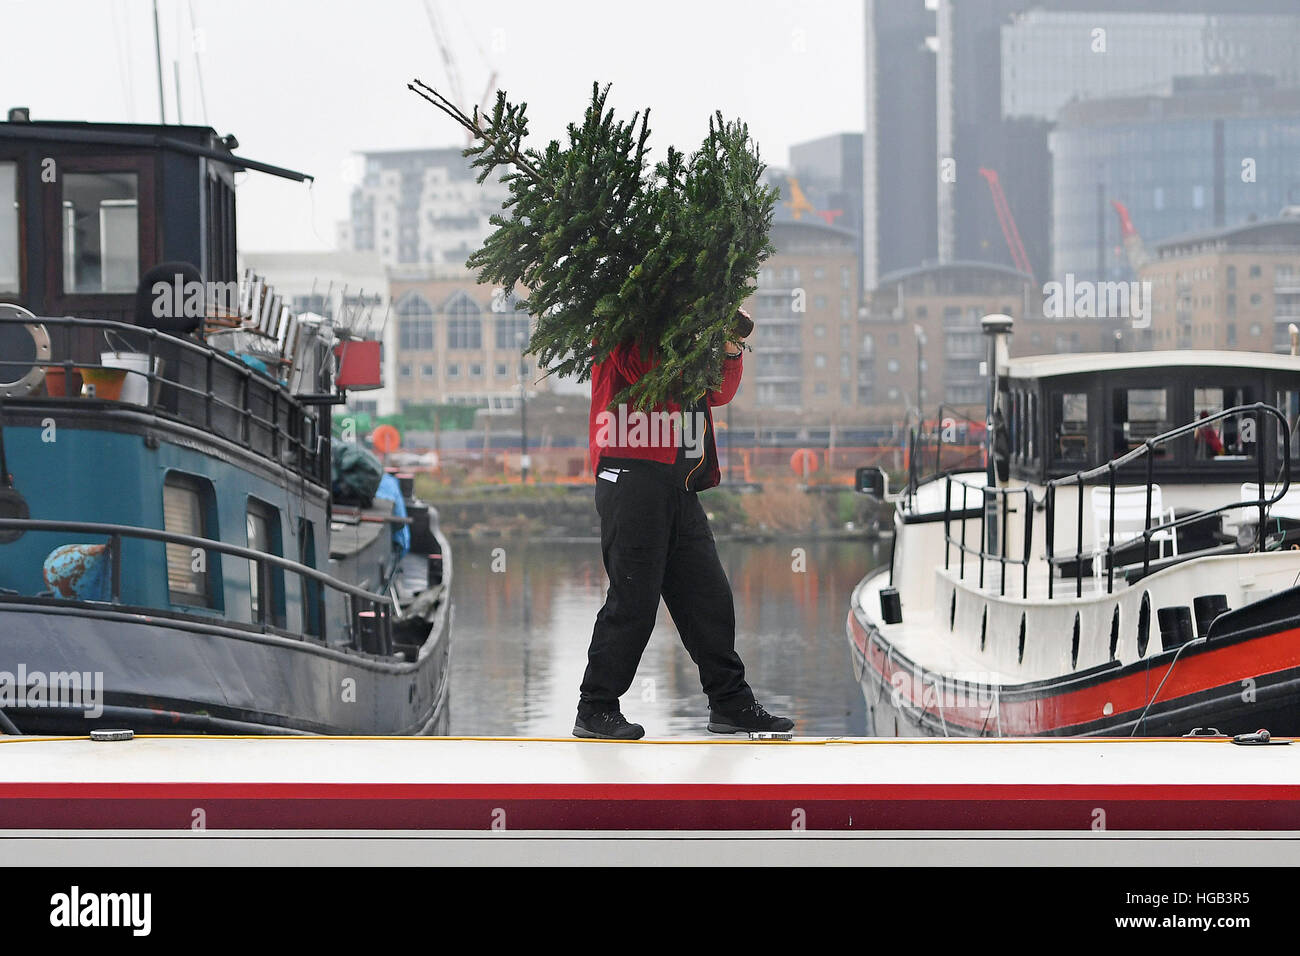 A man carries an old Christmas tree from a boat in Canary Wharf, London, after the Twelfth Night passed. Stock Photo